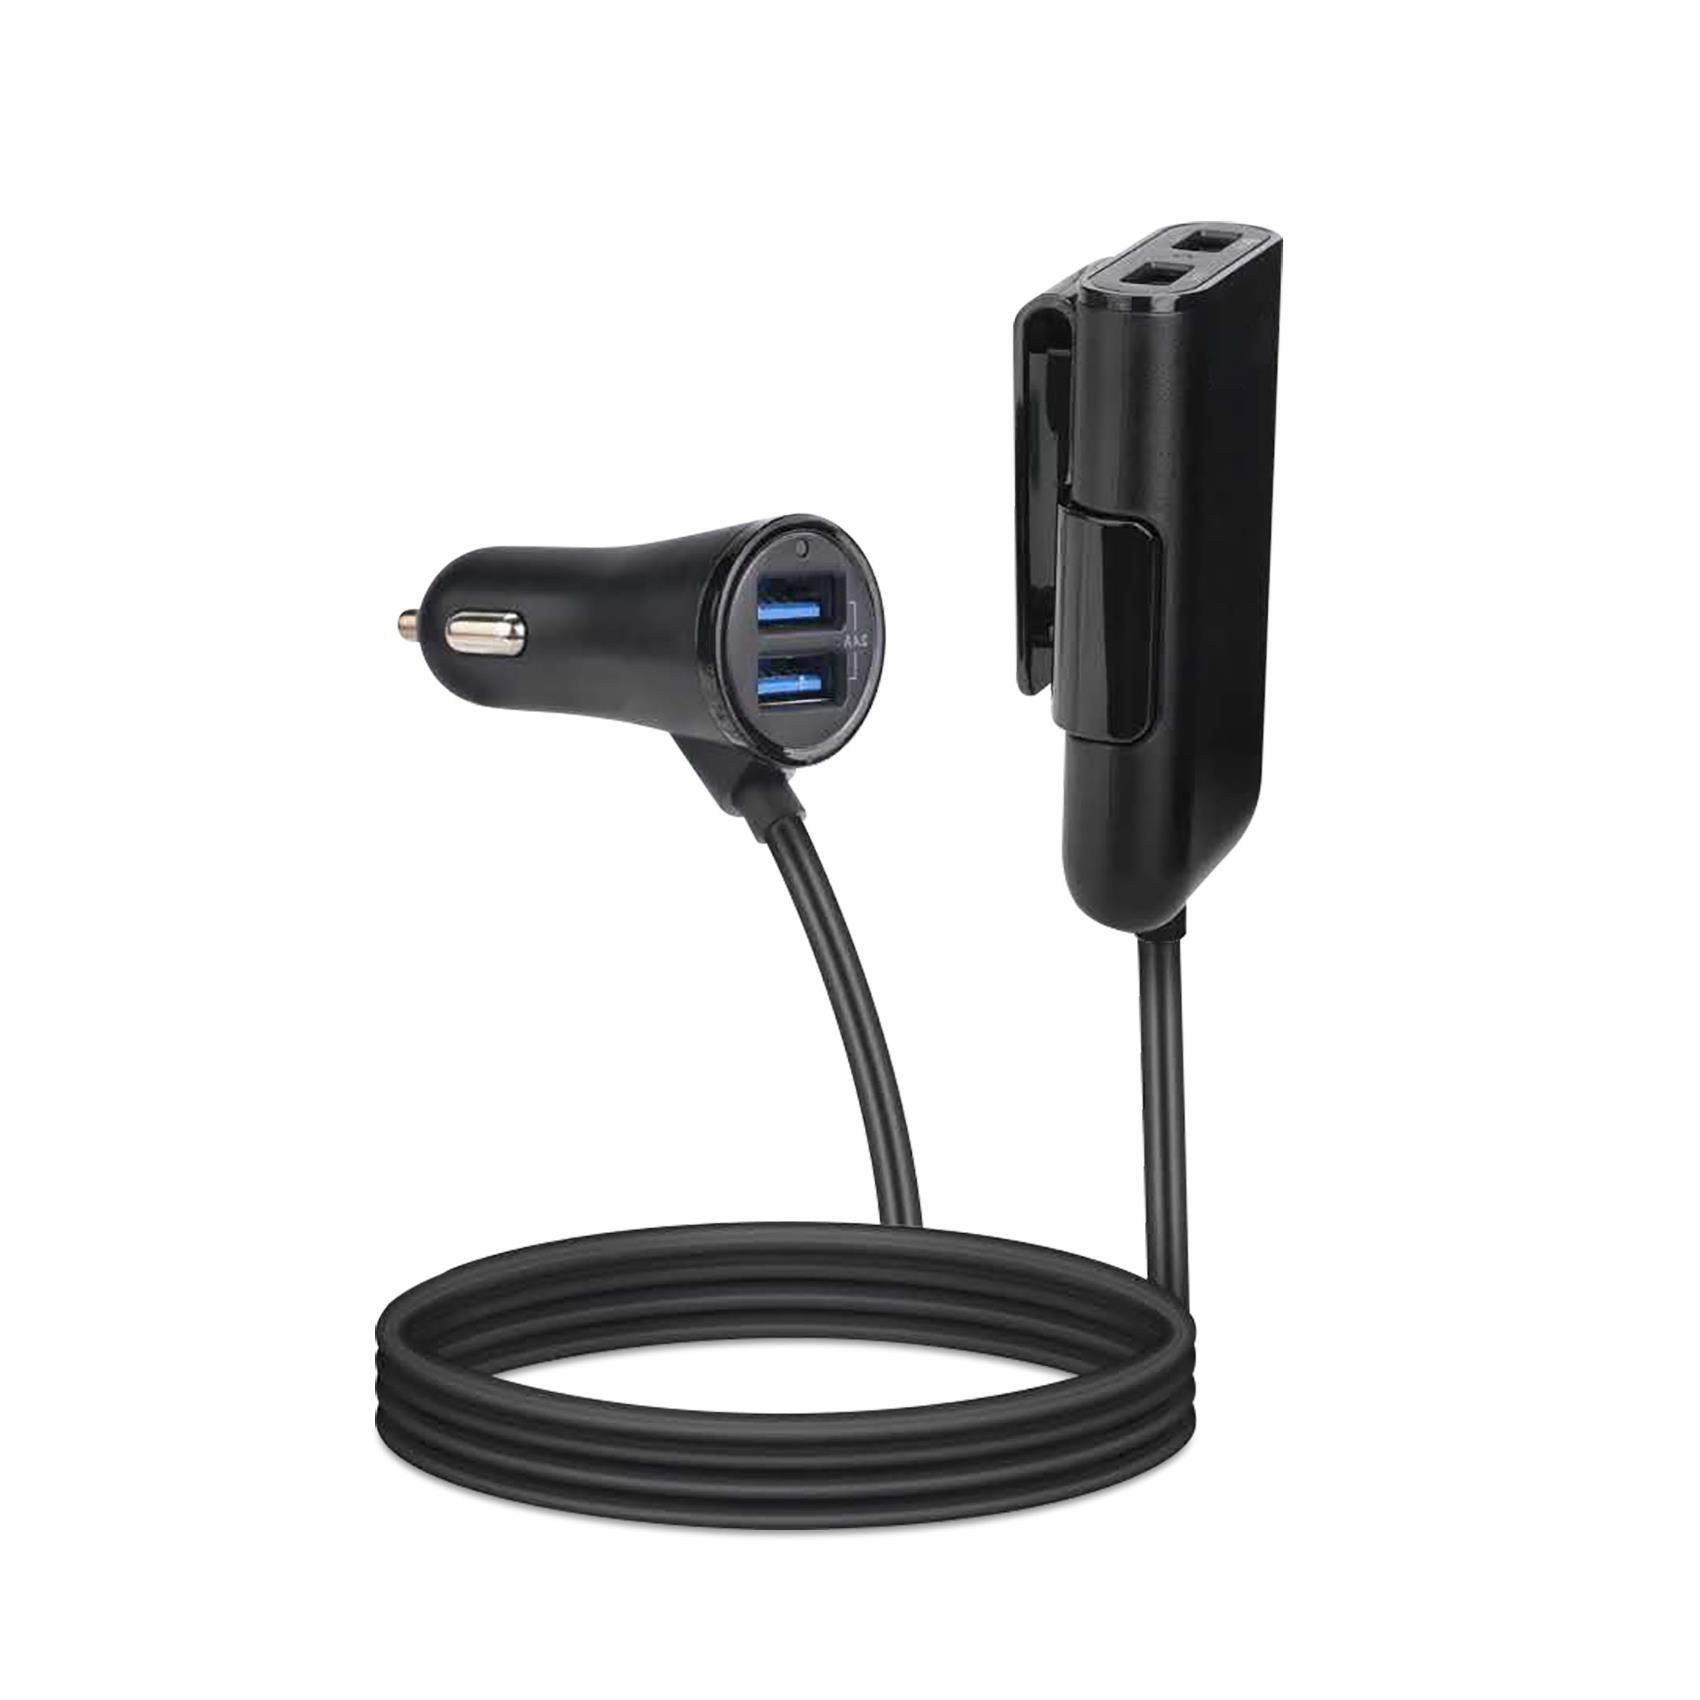 CAR CHARGER 4USB EXTENSIBLE BLACK